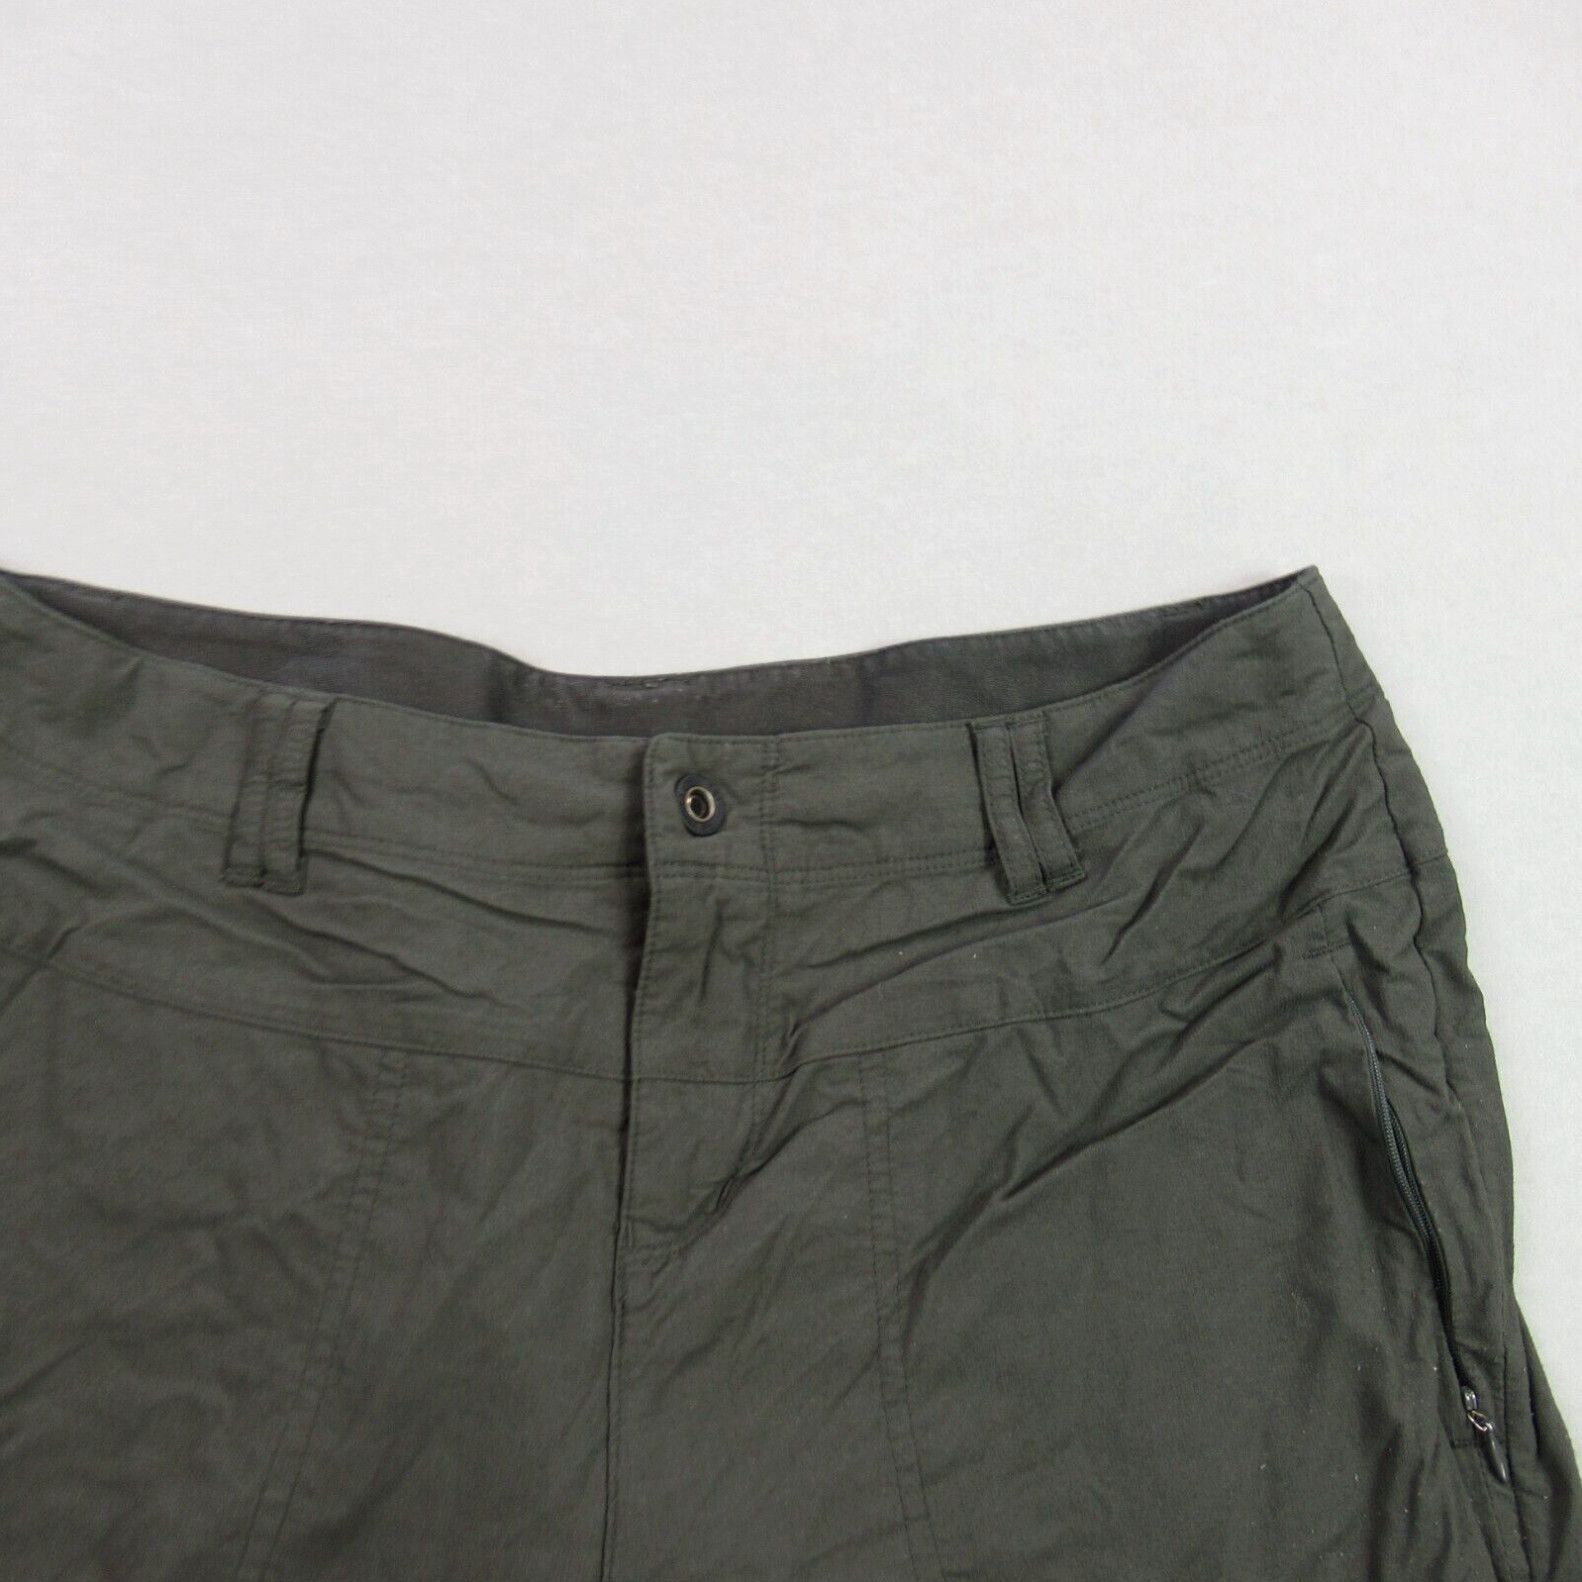 Vintage REI Shorts Womens 10 Lightweight Outdoors Stretch Chino Pockets Green Size 32" / US 10 / IT 46 - 2 Preview